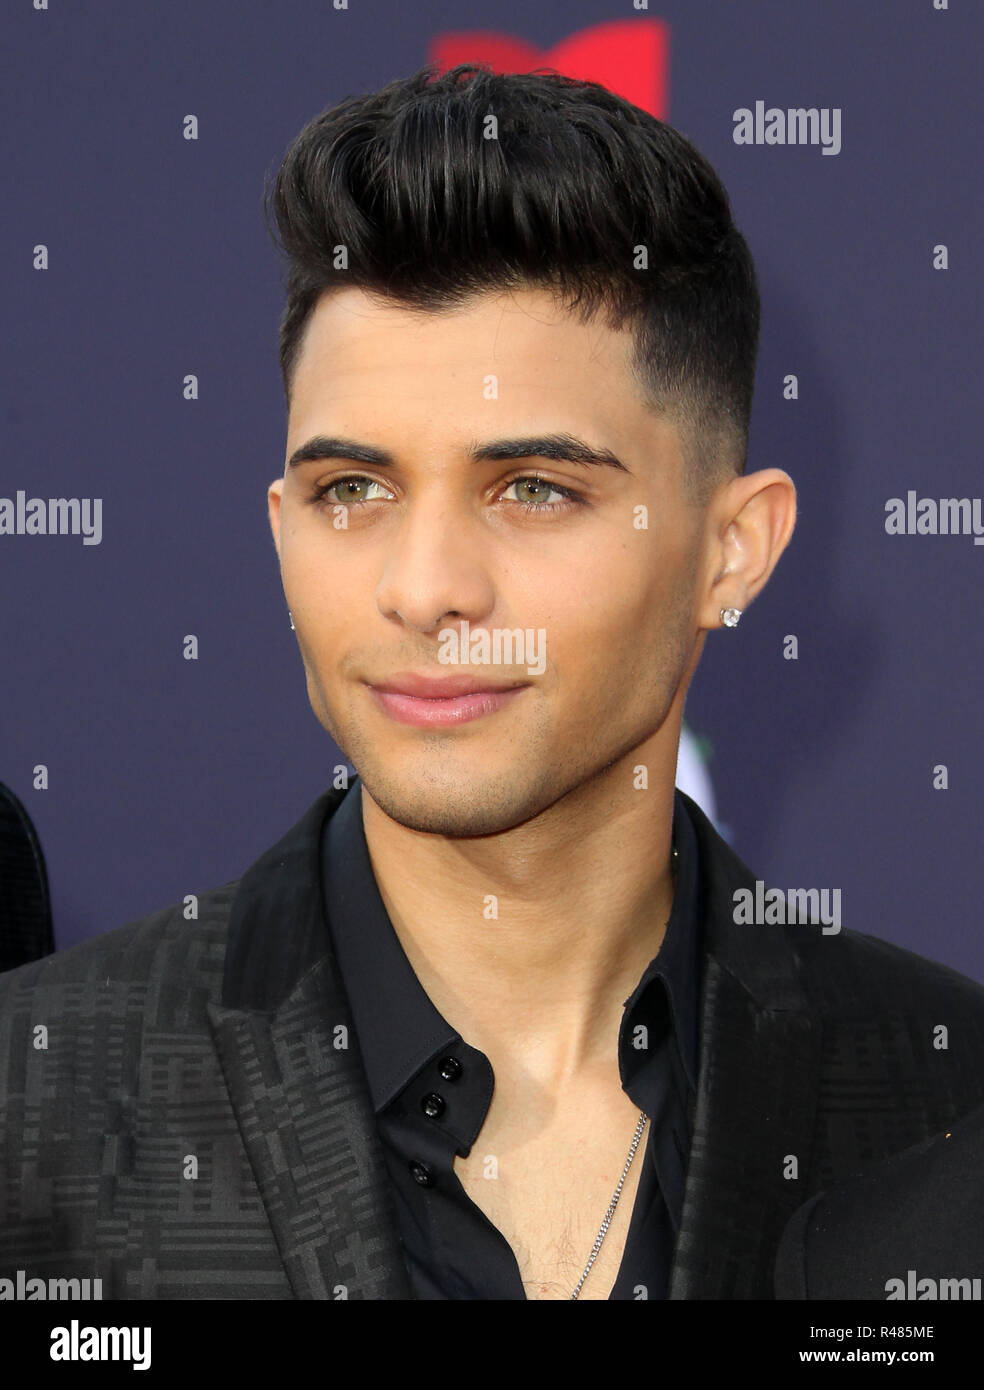 Latin American Music Awards 2018 held at the Dolby Theatre in Los Angeles,  California. Featuring: Erick Brian Colon of CNCO Where: Los Angeles,  California, United States When: 25 Oct 2018 Credit: Adriana